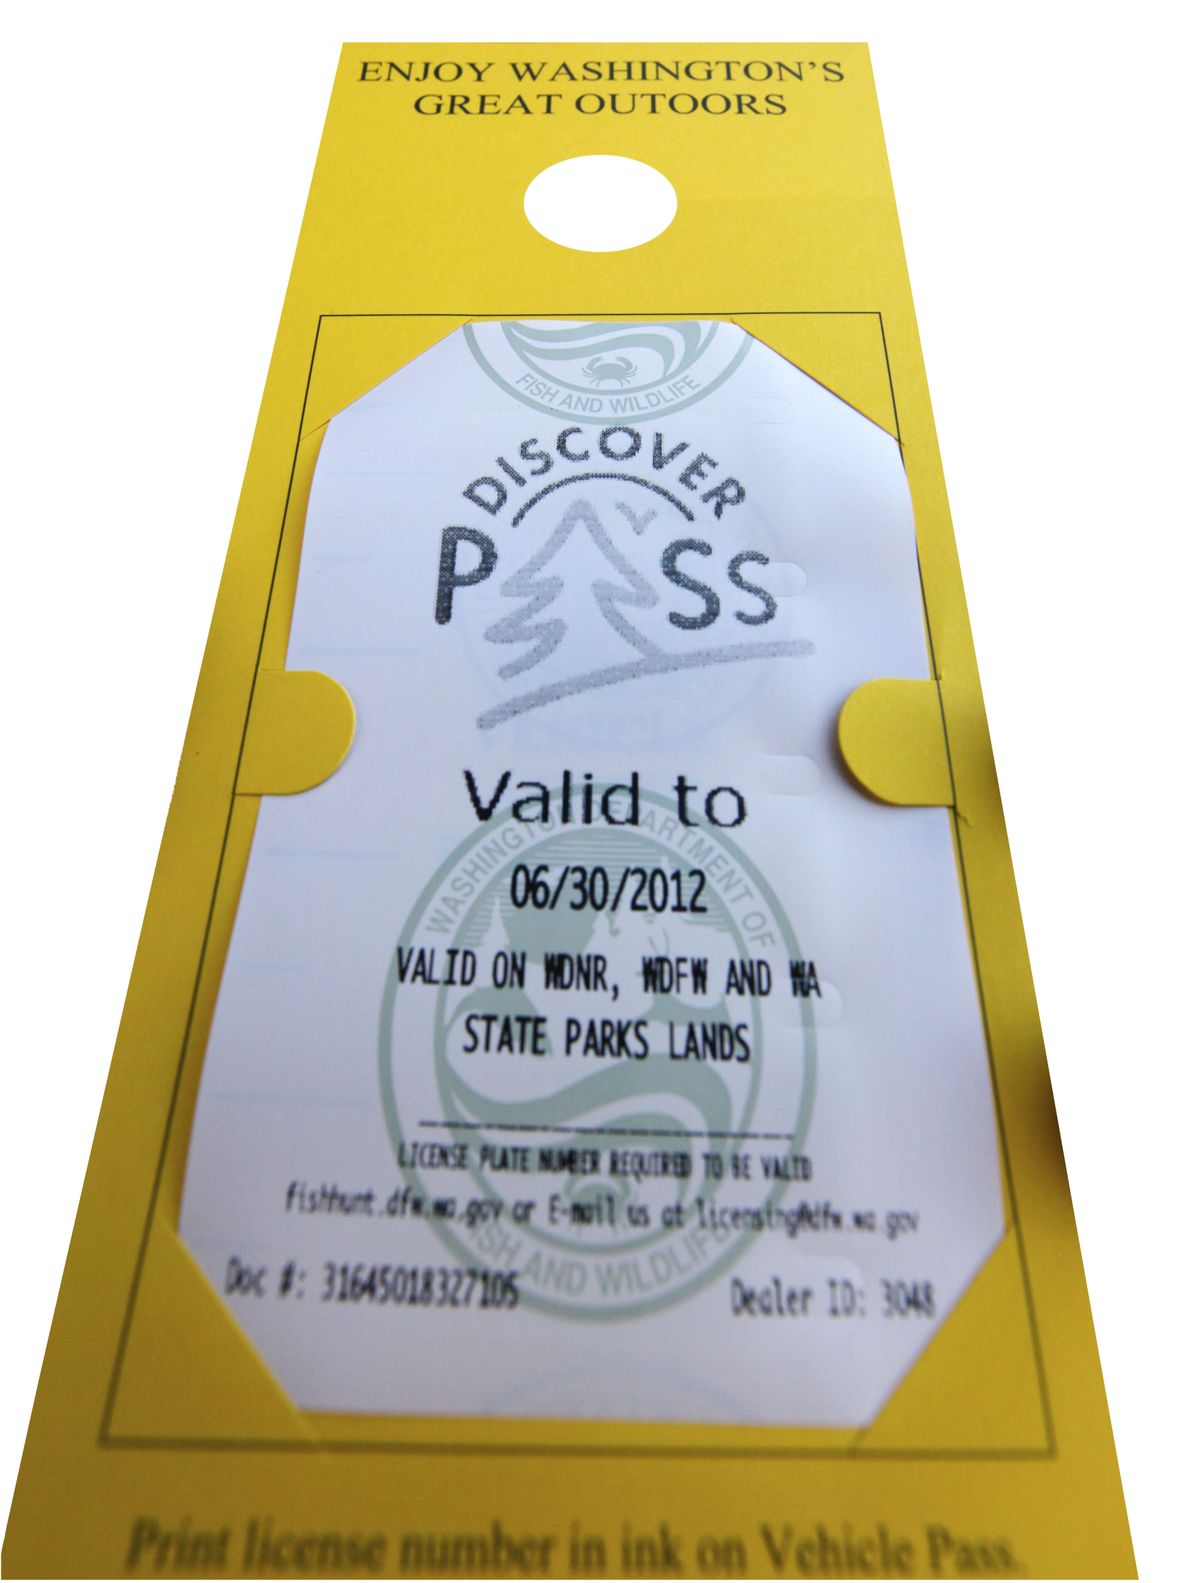 Washington’s Discover Pass was introduced in 2011, requiring the $30 annual pass to enter state parks and most other state lands. Sales of the pass did not initially meet expectations, forcing the cash-strapped State Parks to issue pink slips to eliminate 160 of the agency’s 516 full-time employees. (Associated Press)